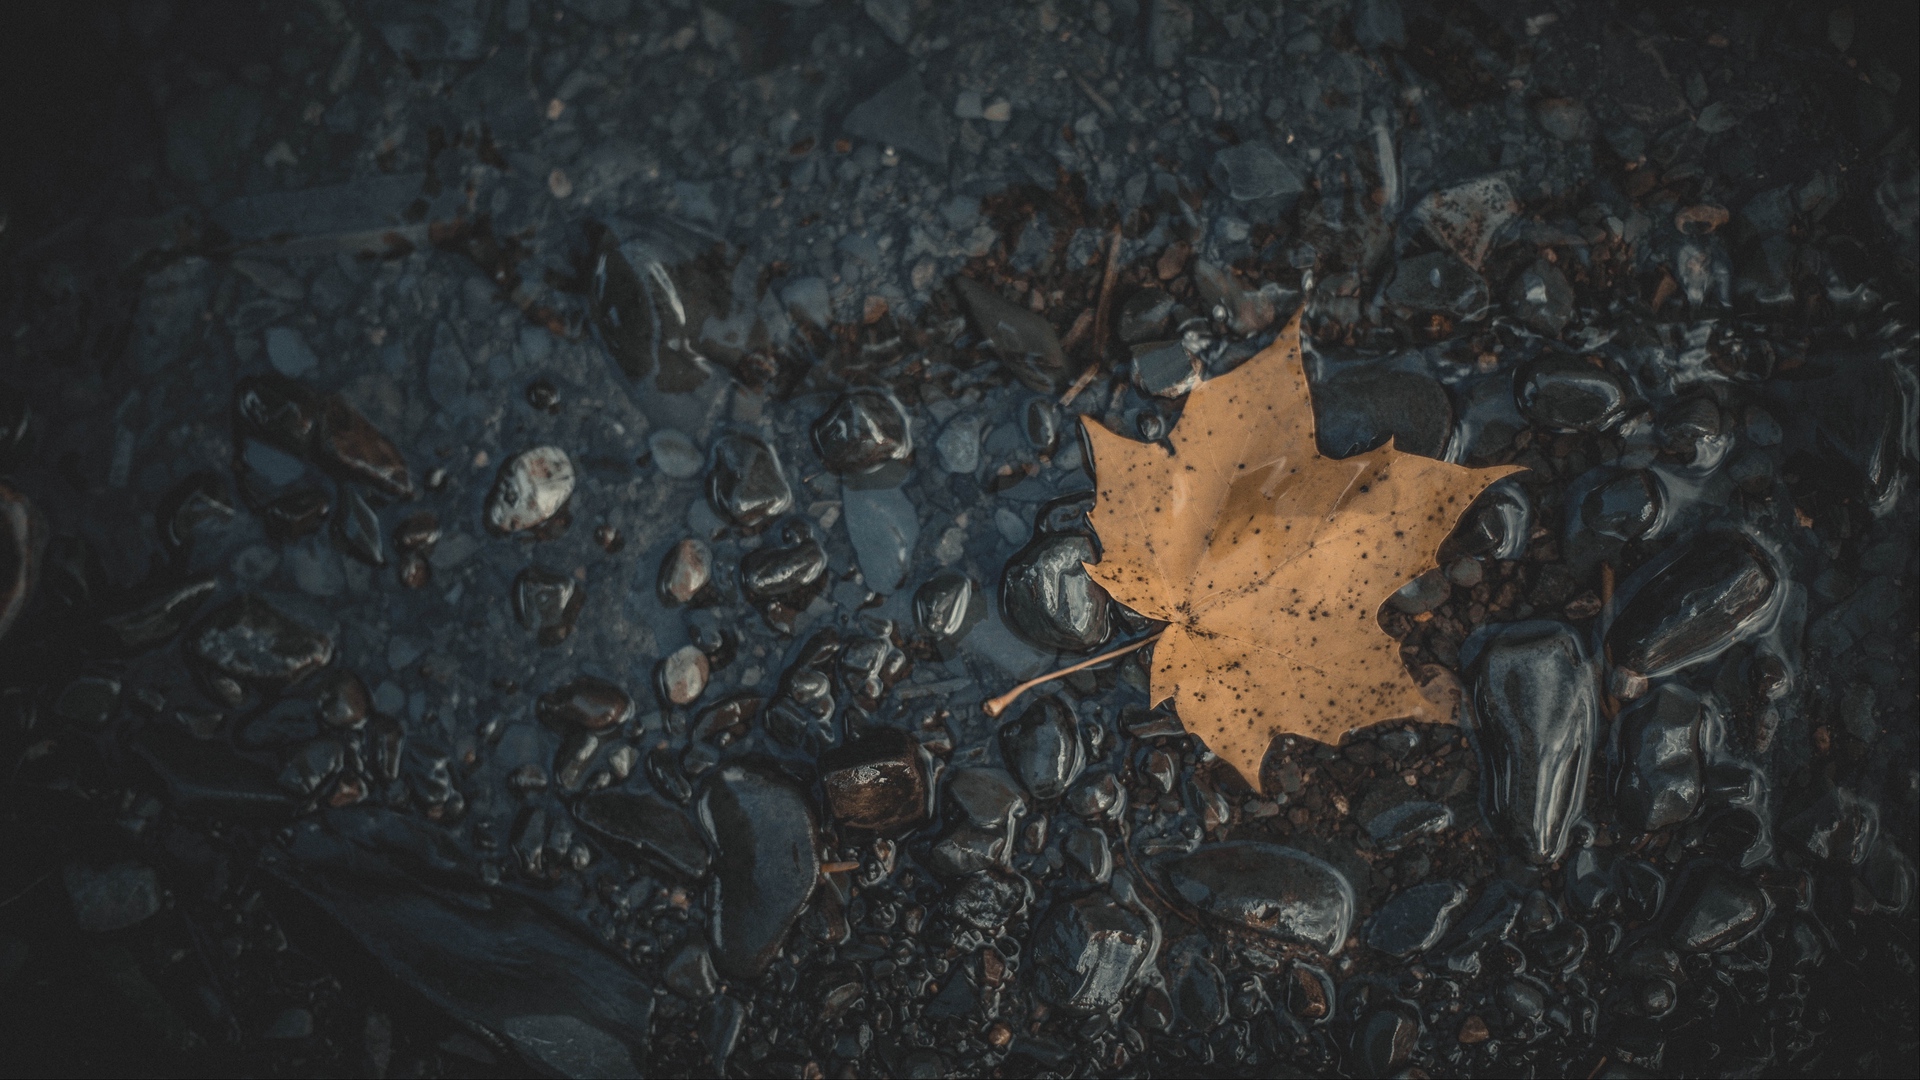 General 1920x1080 nature photography leaves stones wet fallen leaves